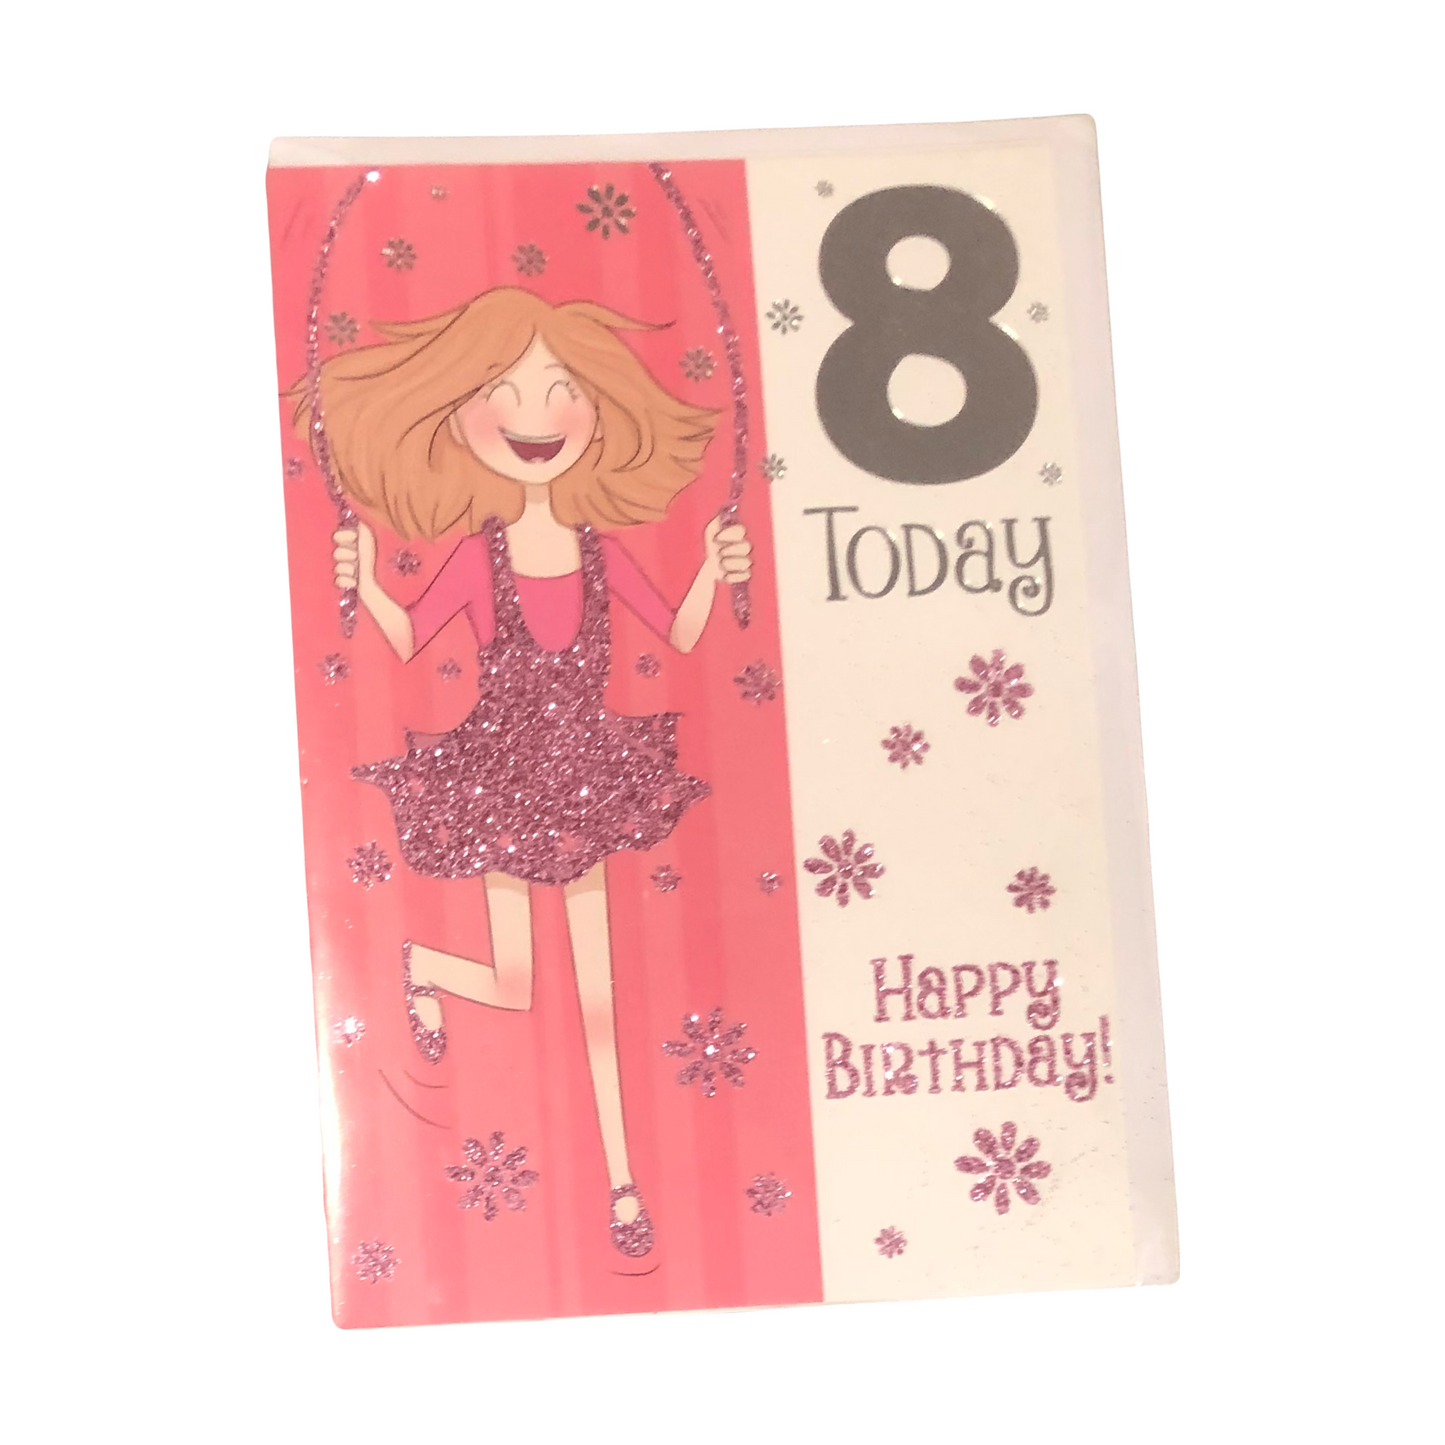 8 Today Card